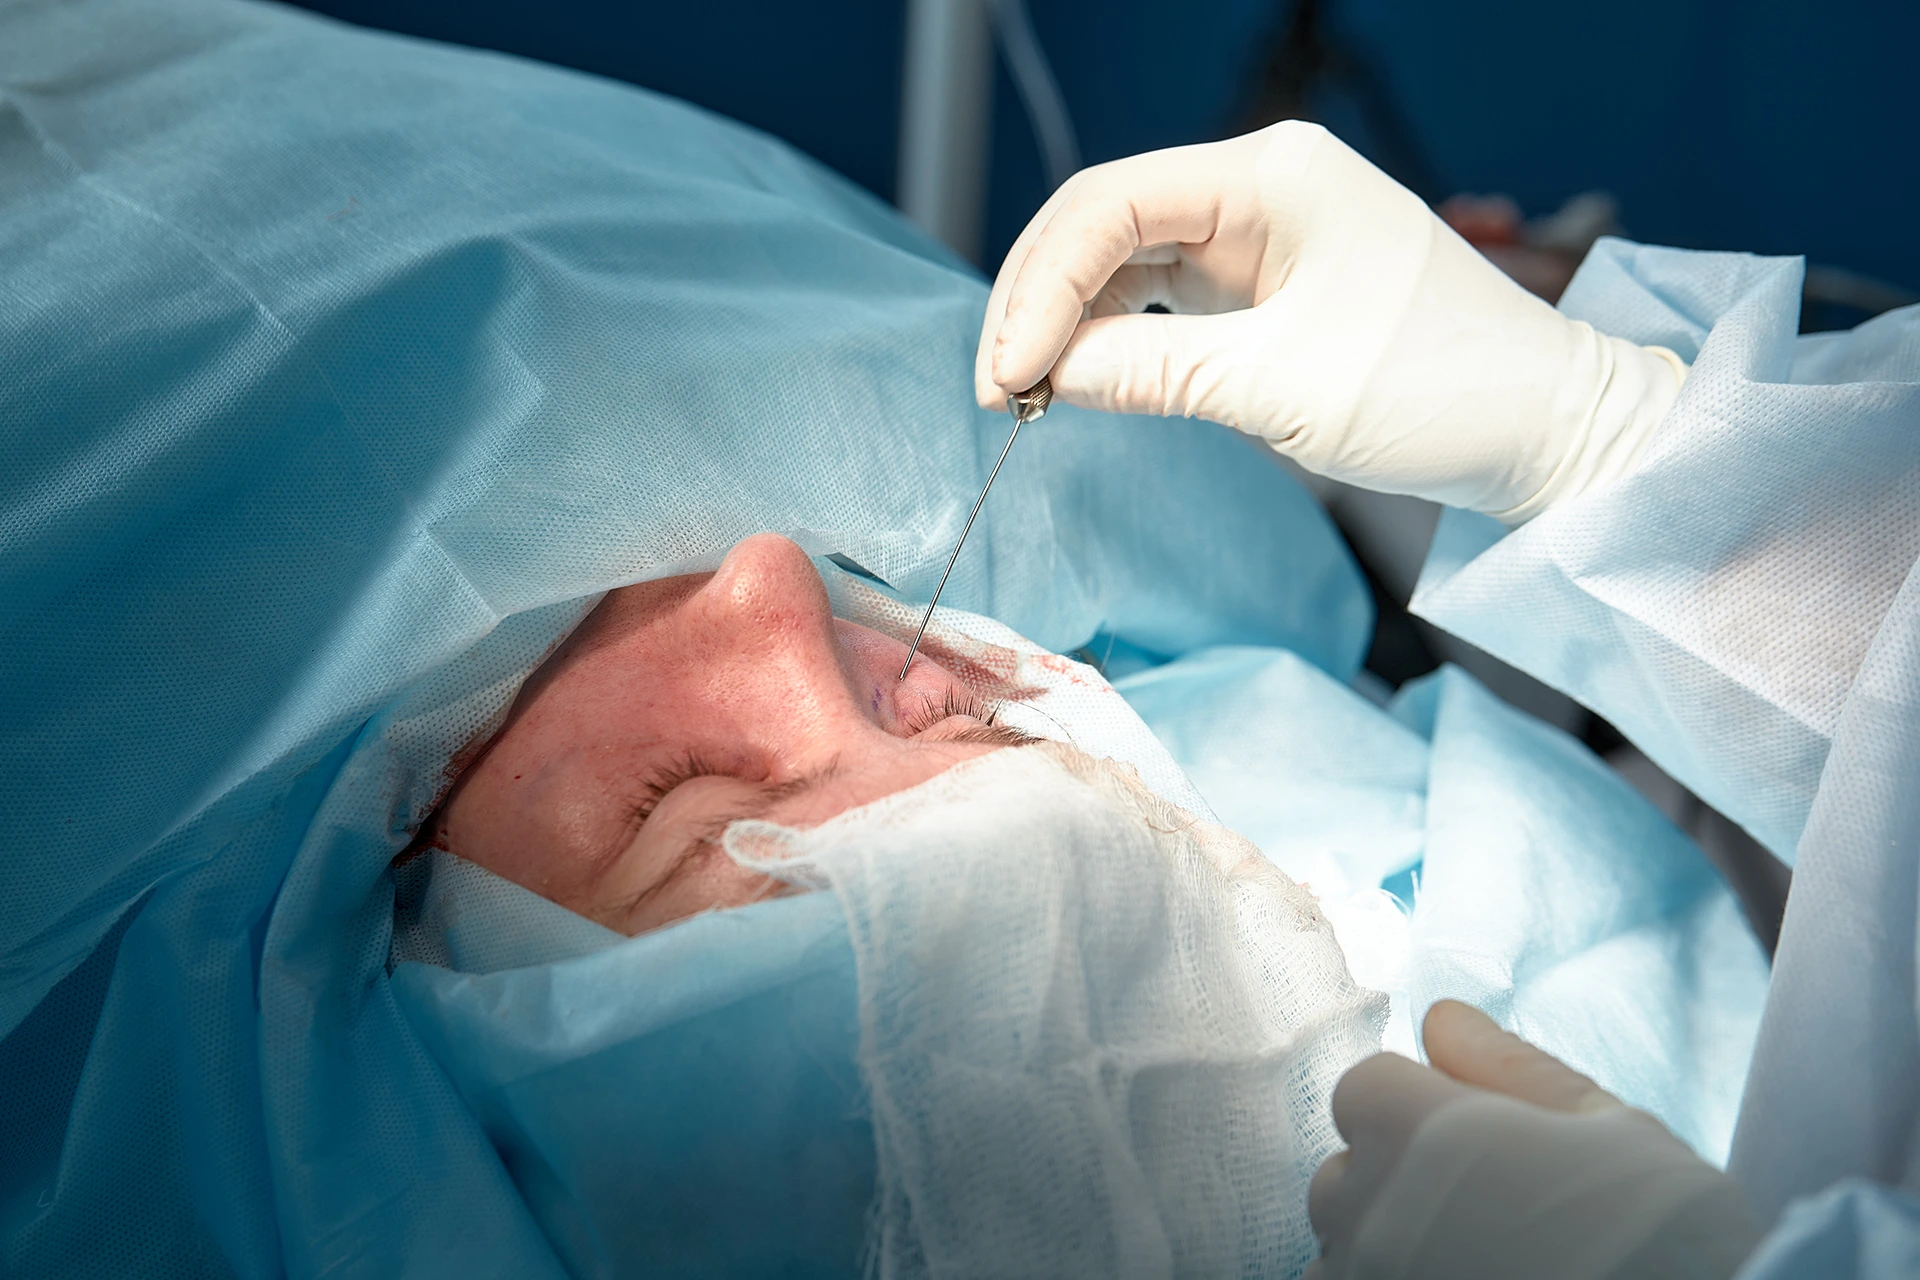 A person being operated on in an operating room.